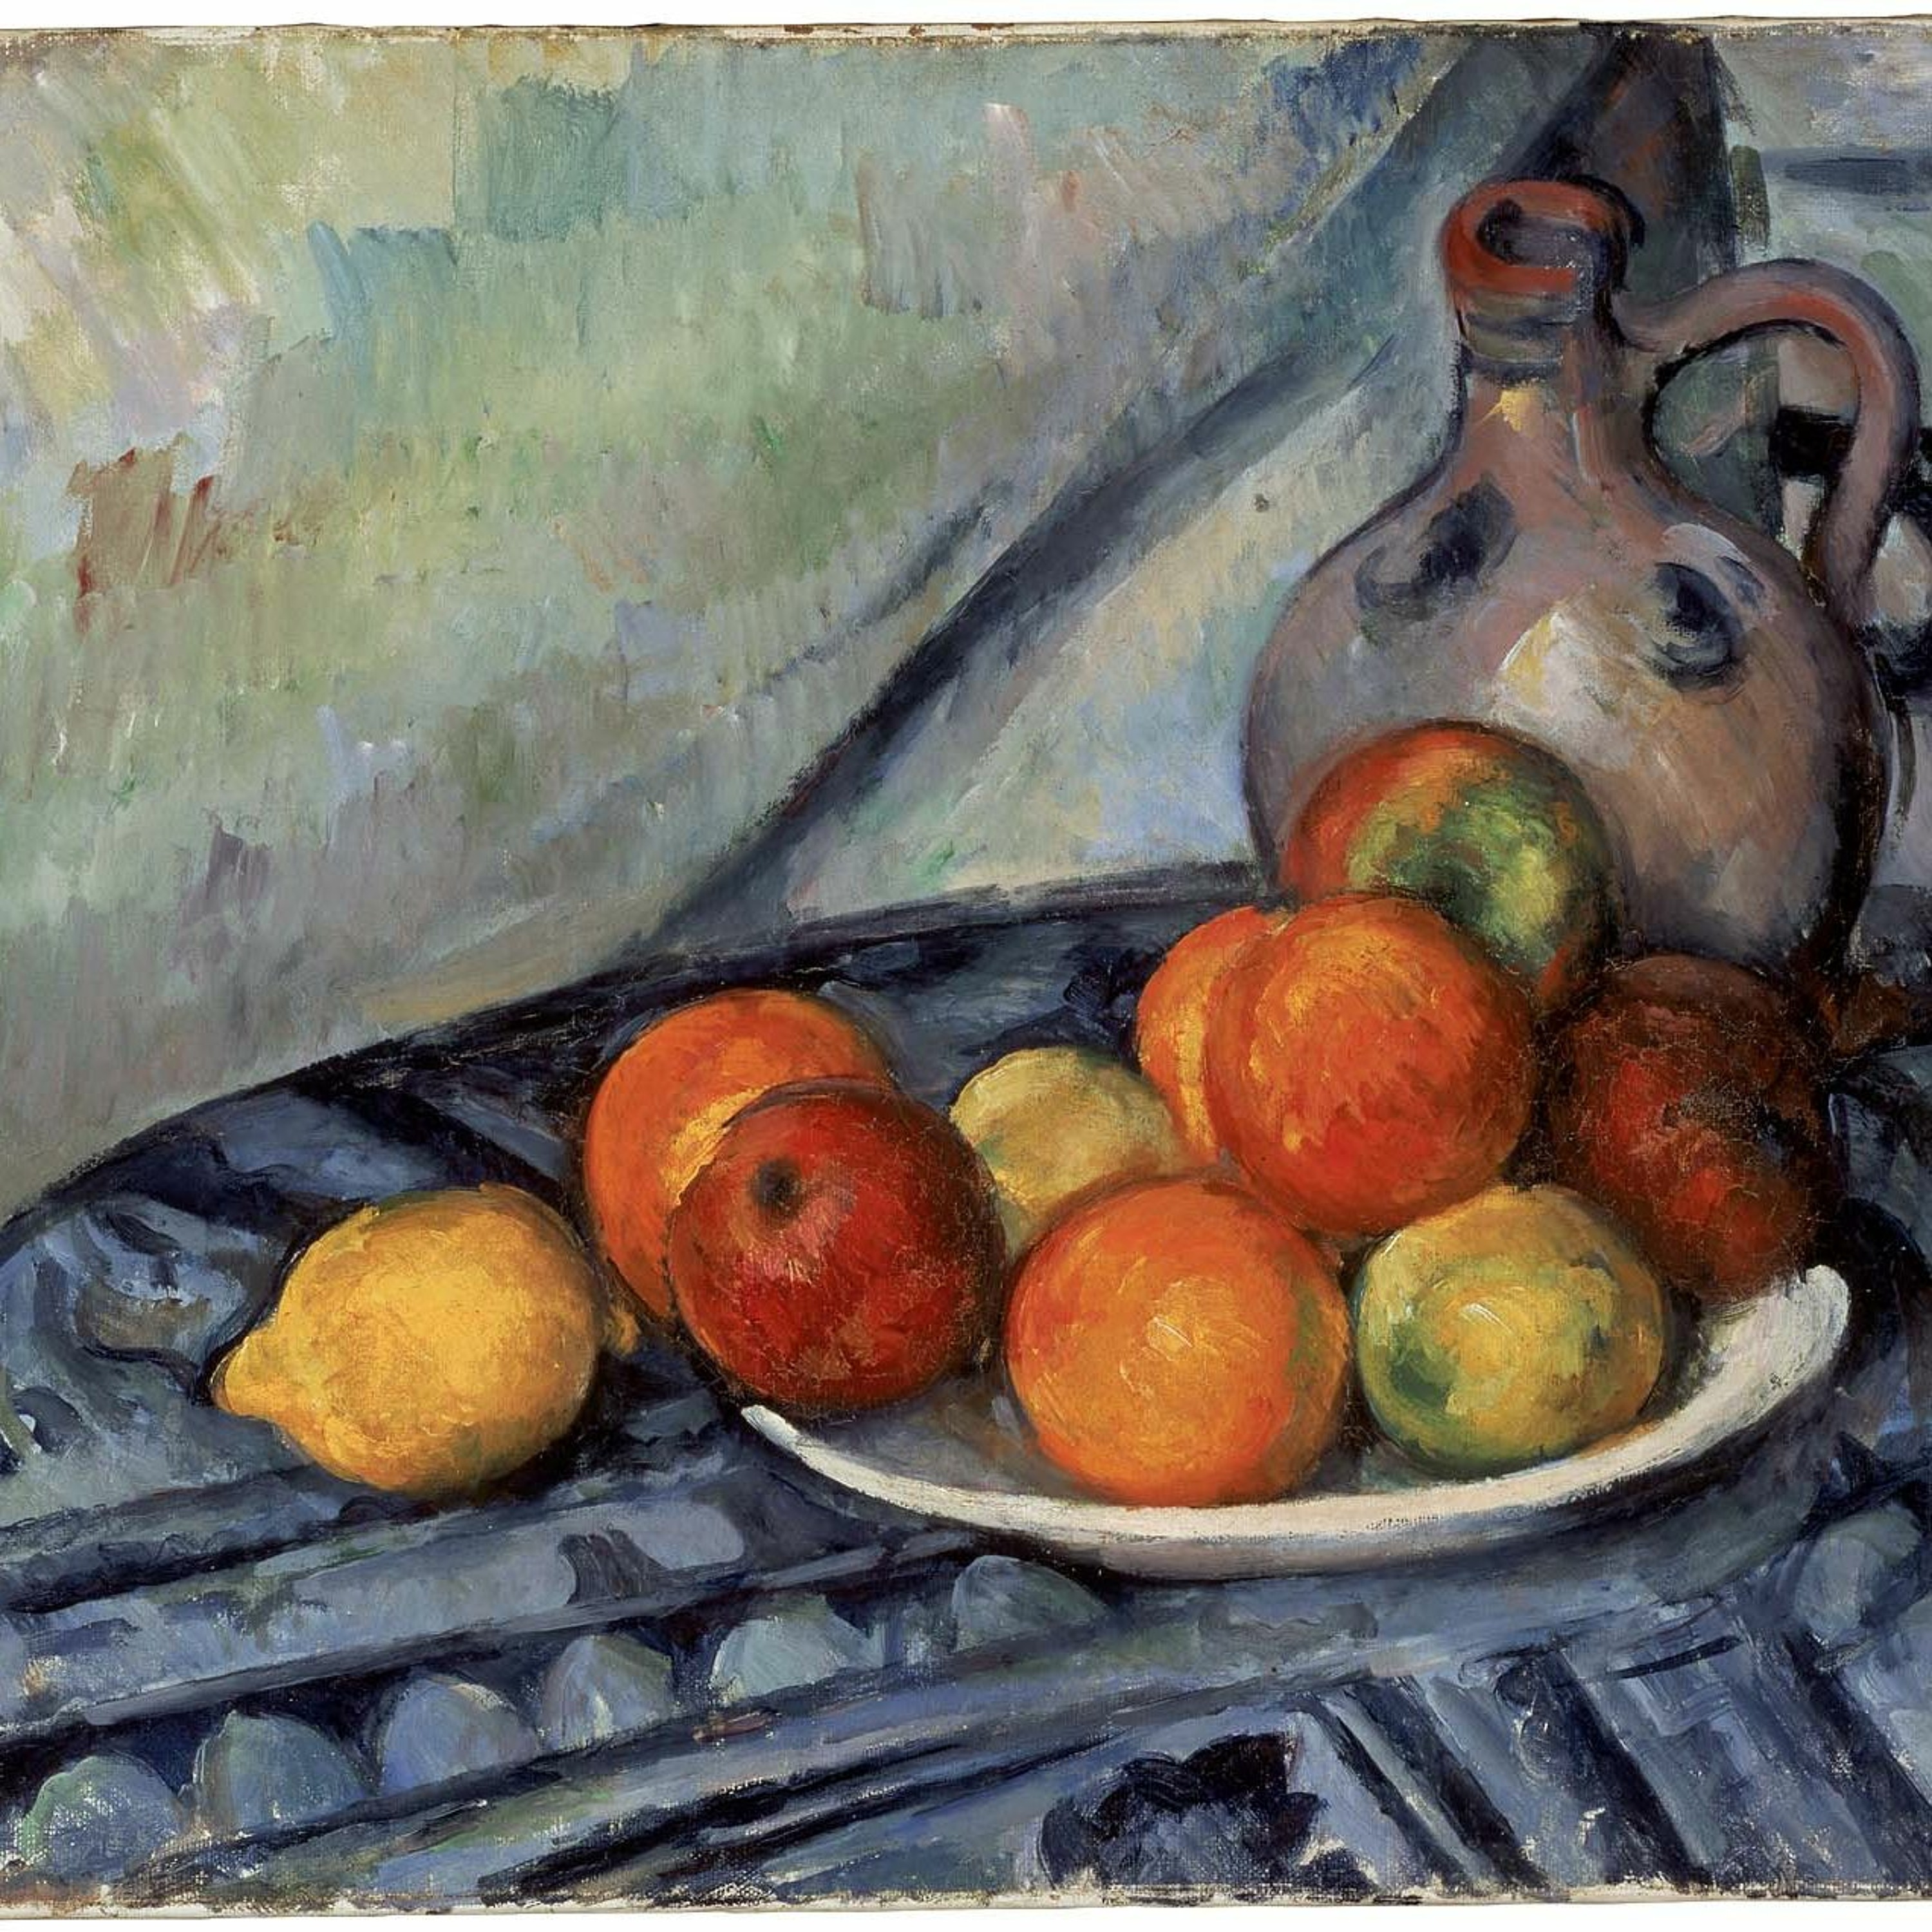 Ep. 1 - Paul Cezanne's  "Fruit and Jug on a Table" (c. 1890-94)